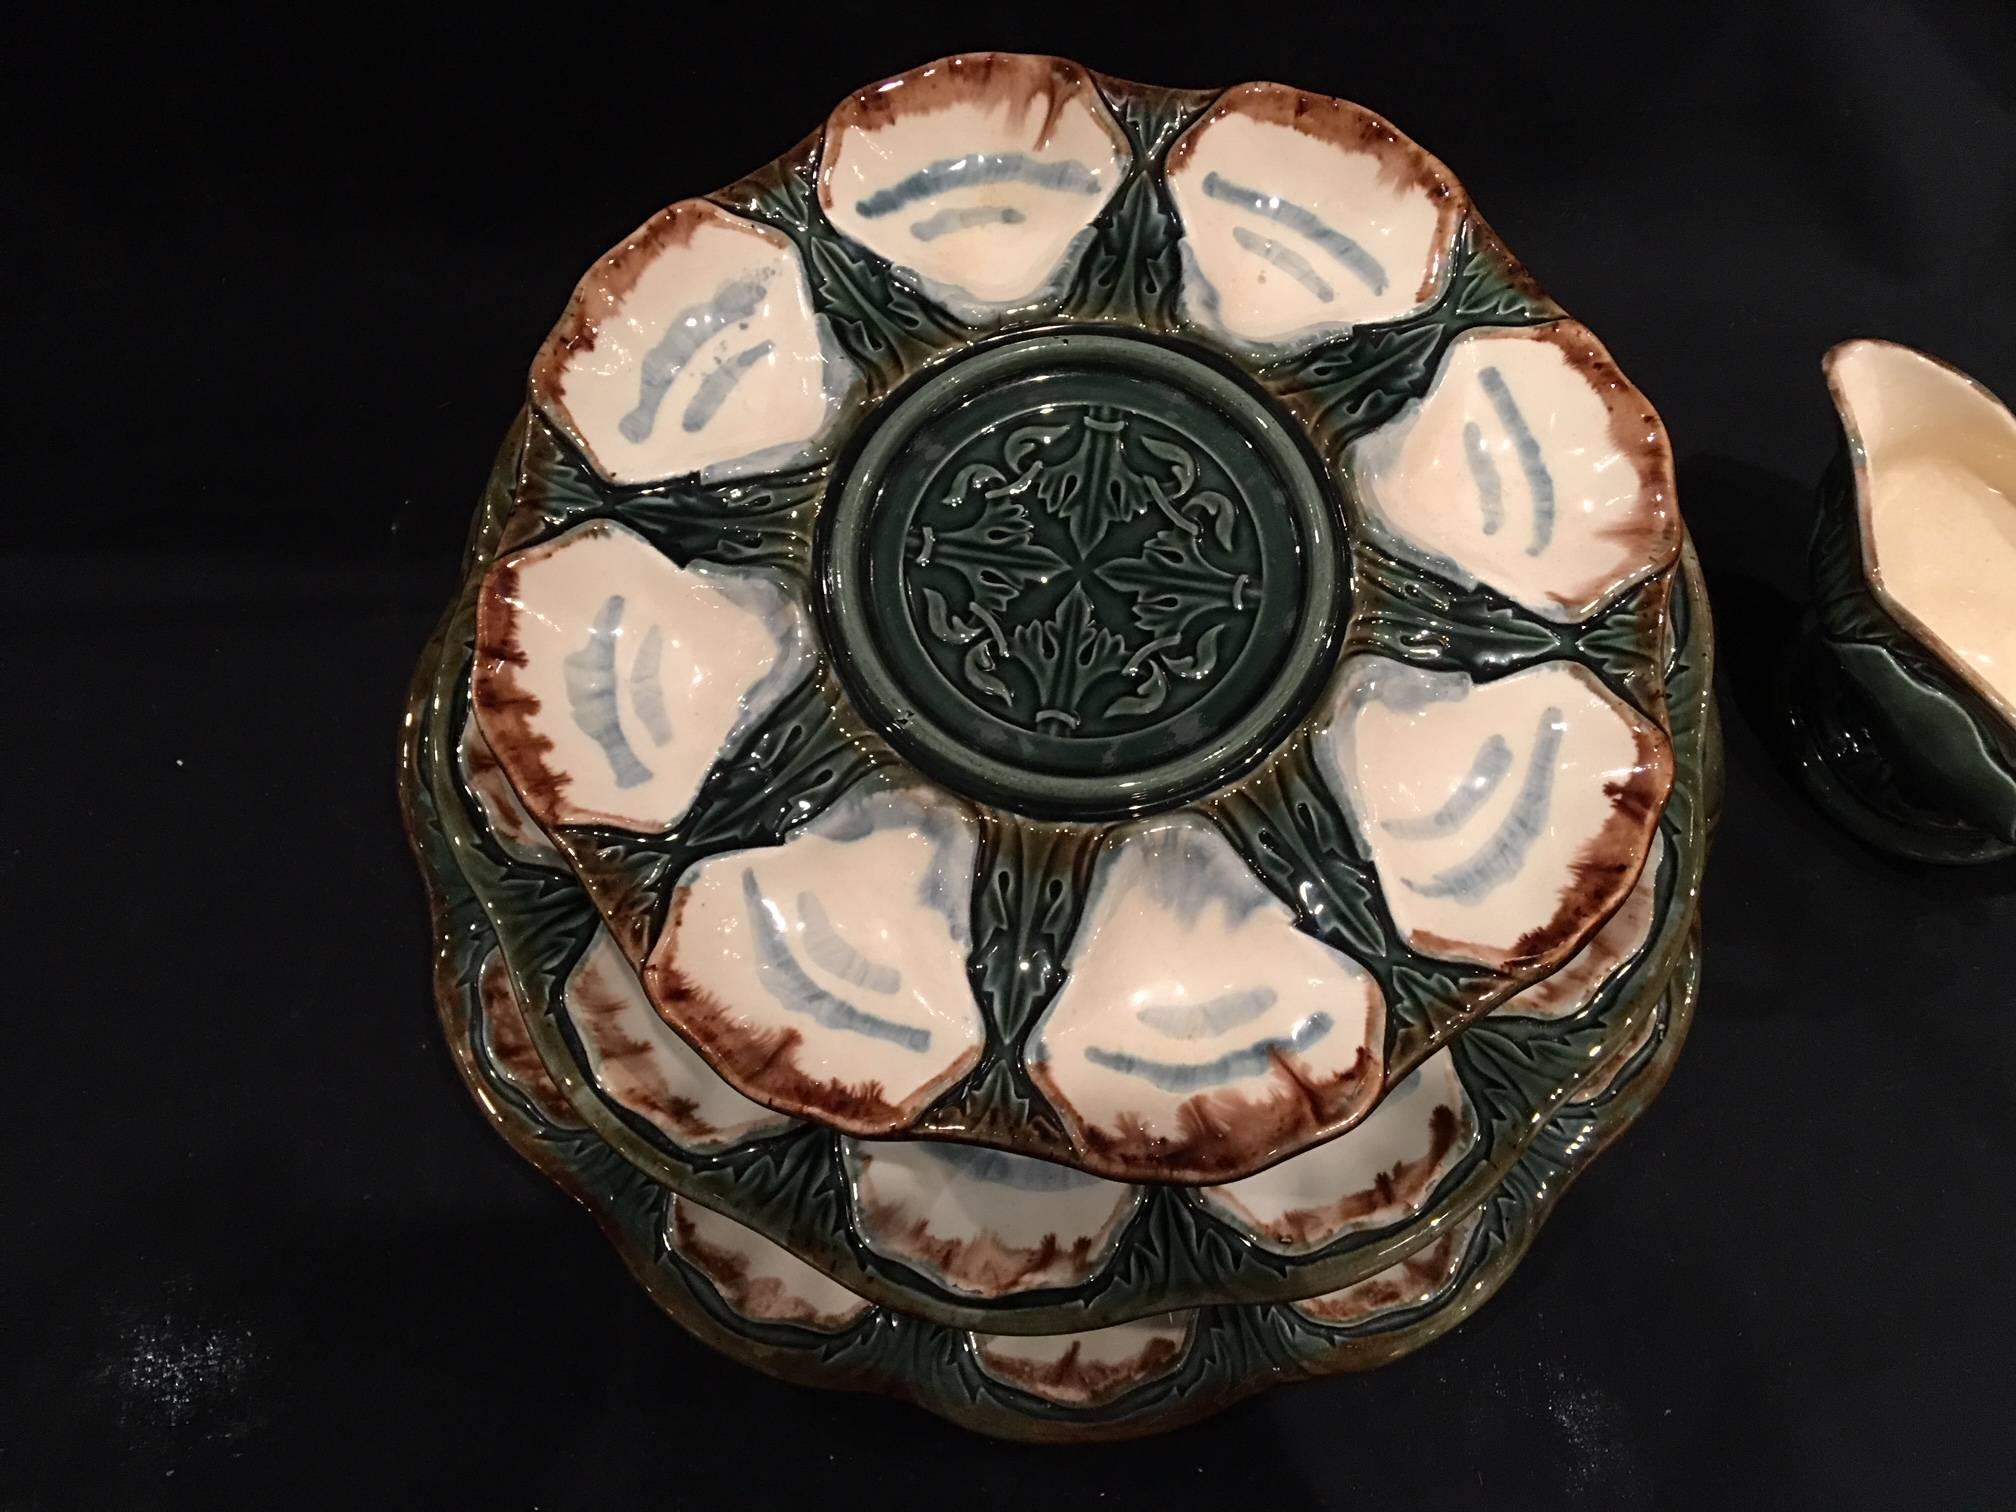 Set of three Majolica long champ Terre oyster platters, 19th century. Large platter is 14